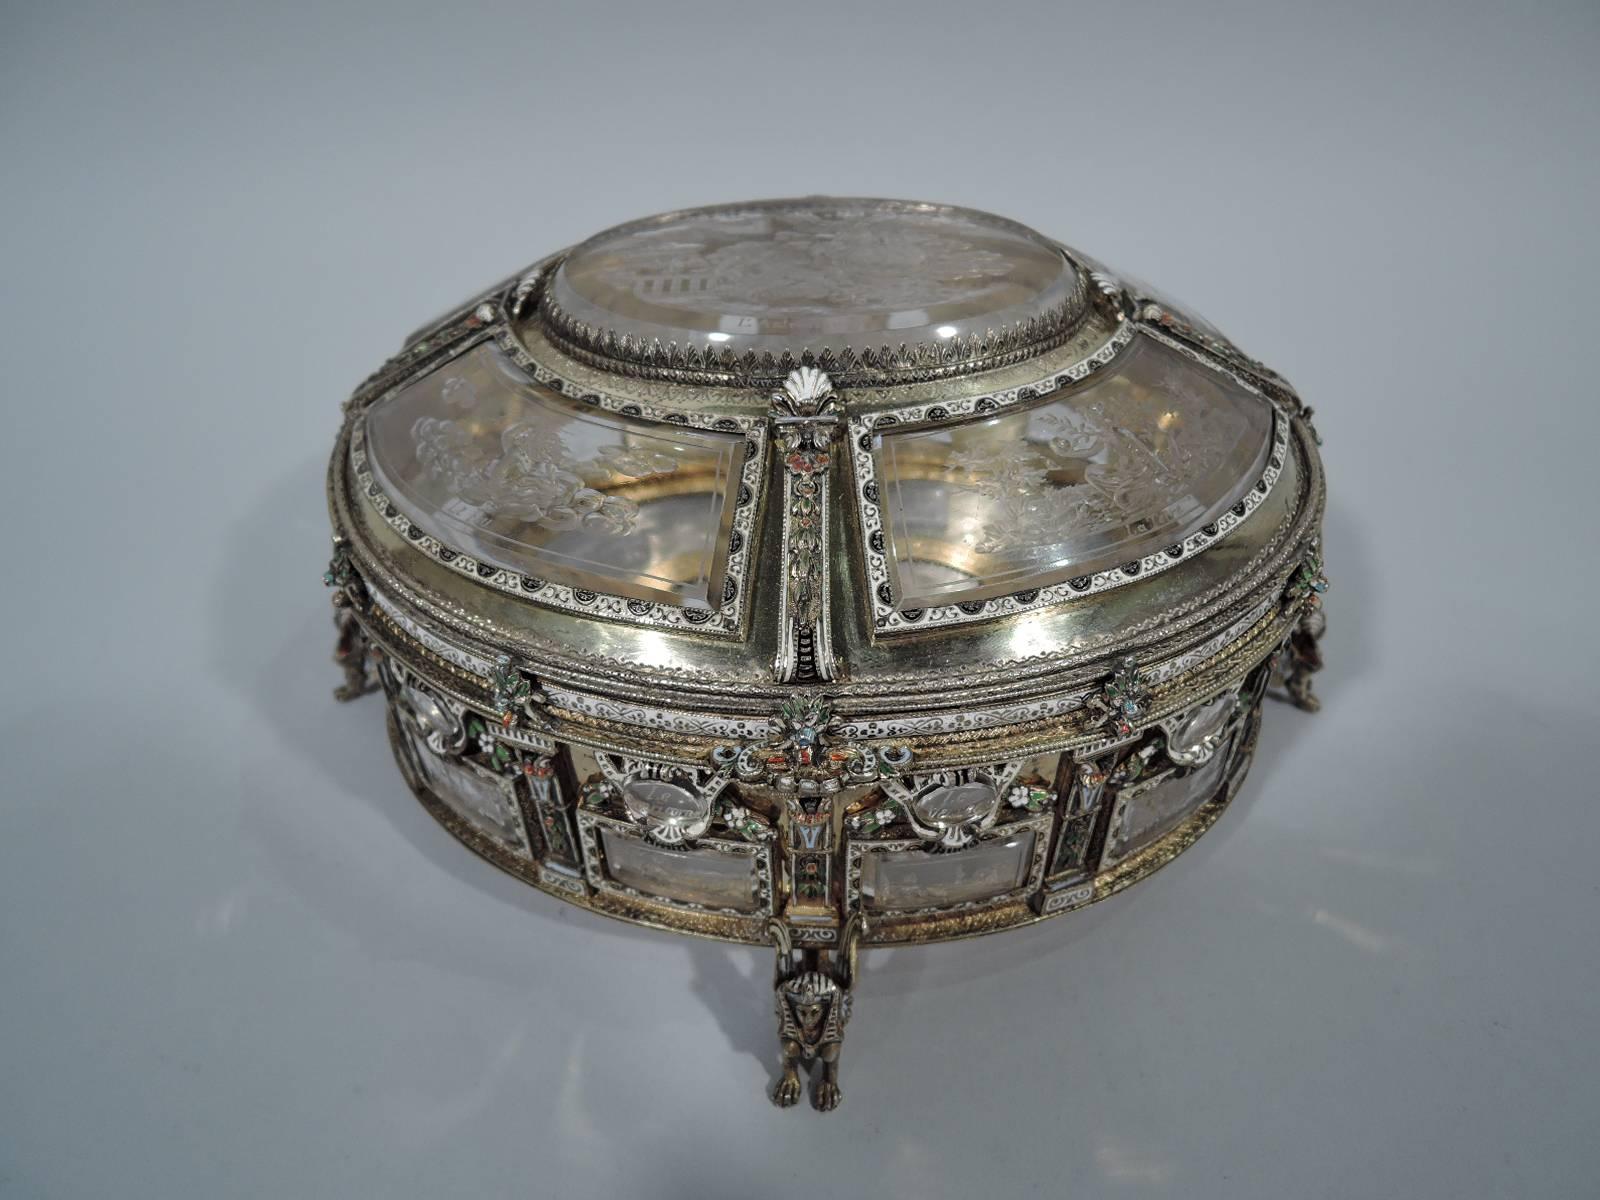 Austrian rock crystal and silver-gilt casket, circa 1880. Oval with hinged and domed cover. Silver-gilt pilaster frame heightened with enamel and bevelled rock crystal windows etched with astrological symbols and the corresponding sign in French. On